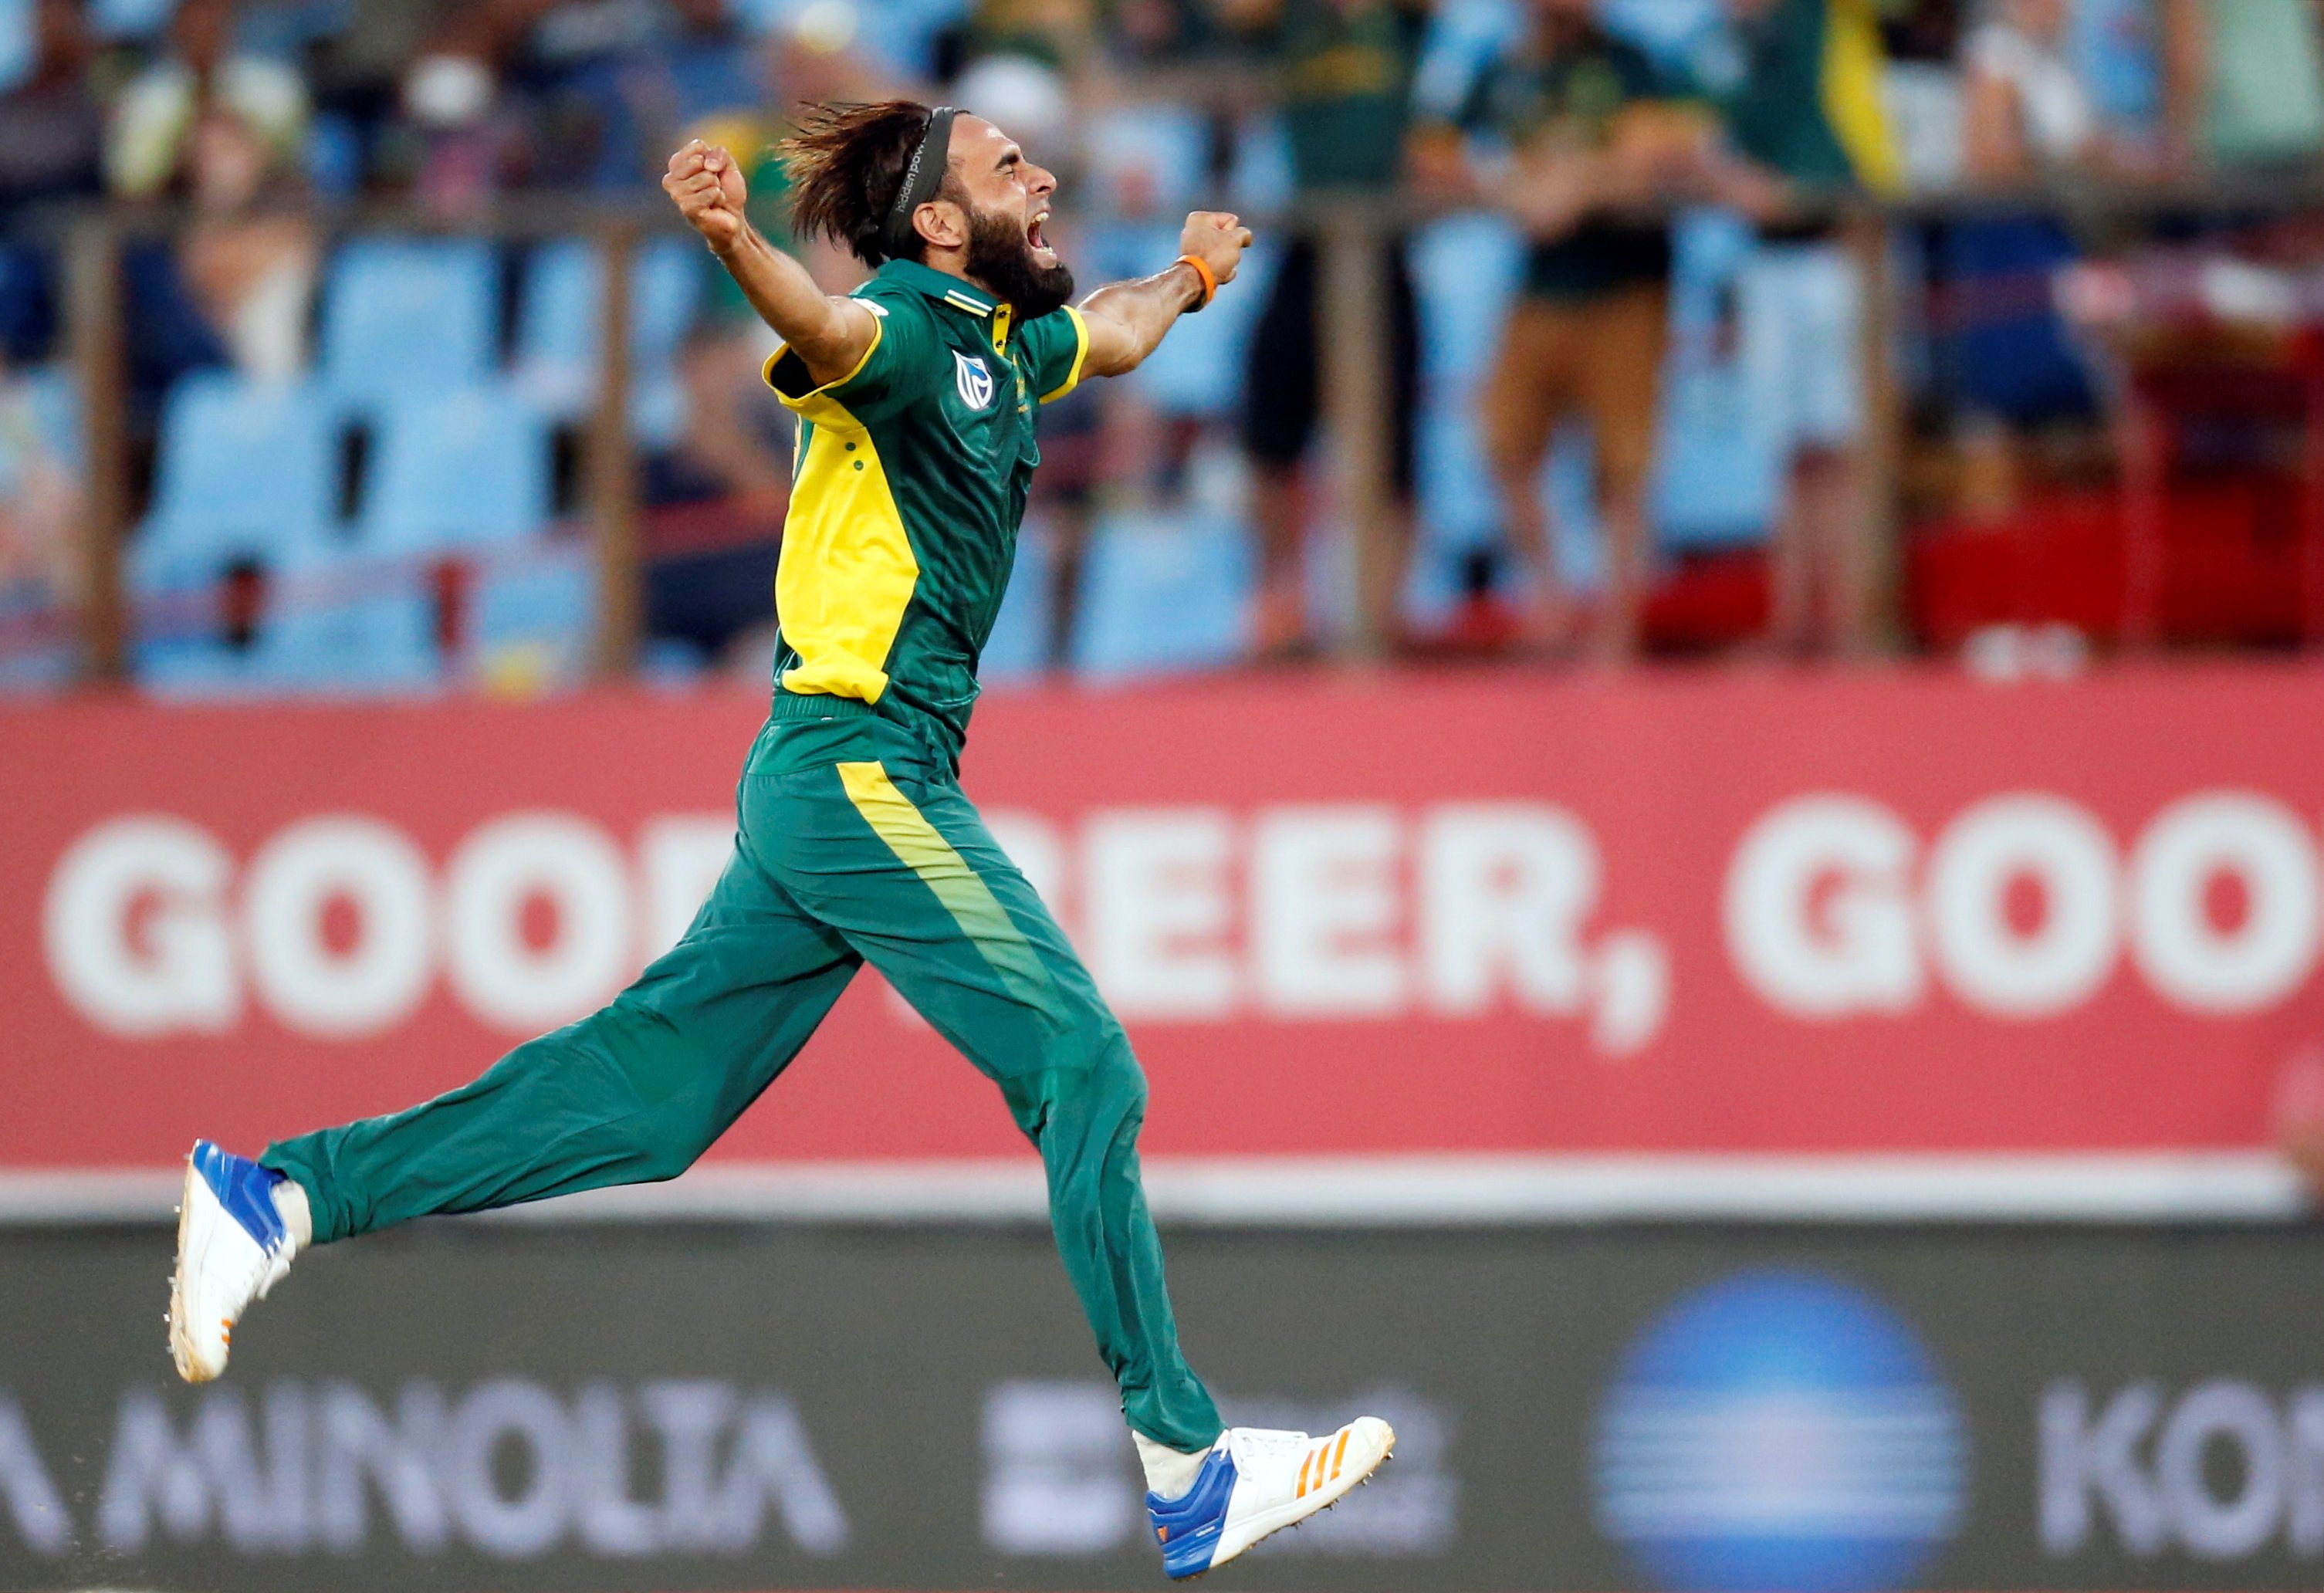 These Imran Tahir memes are all you need to be pumped for Pak vs NZ match